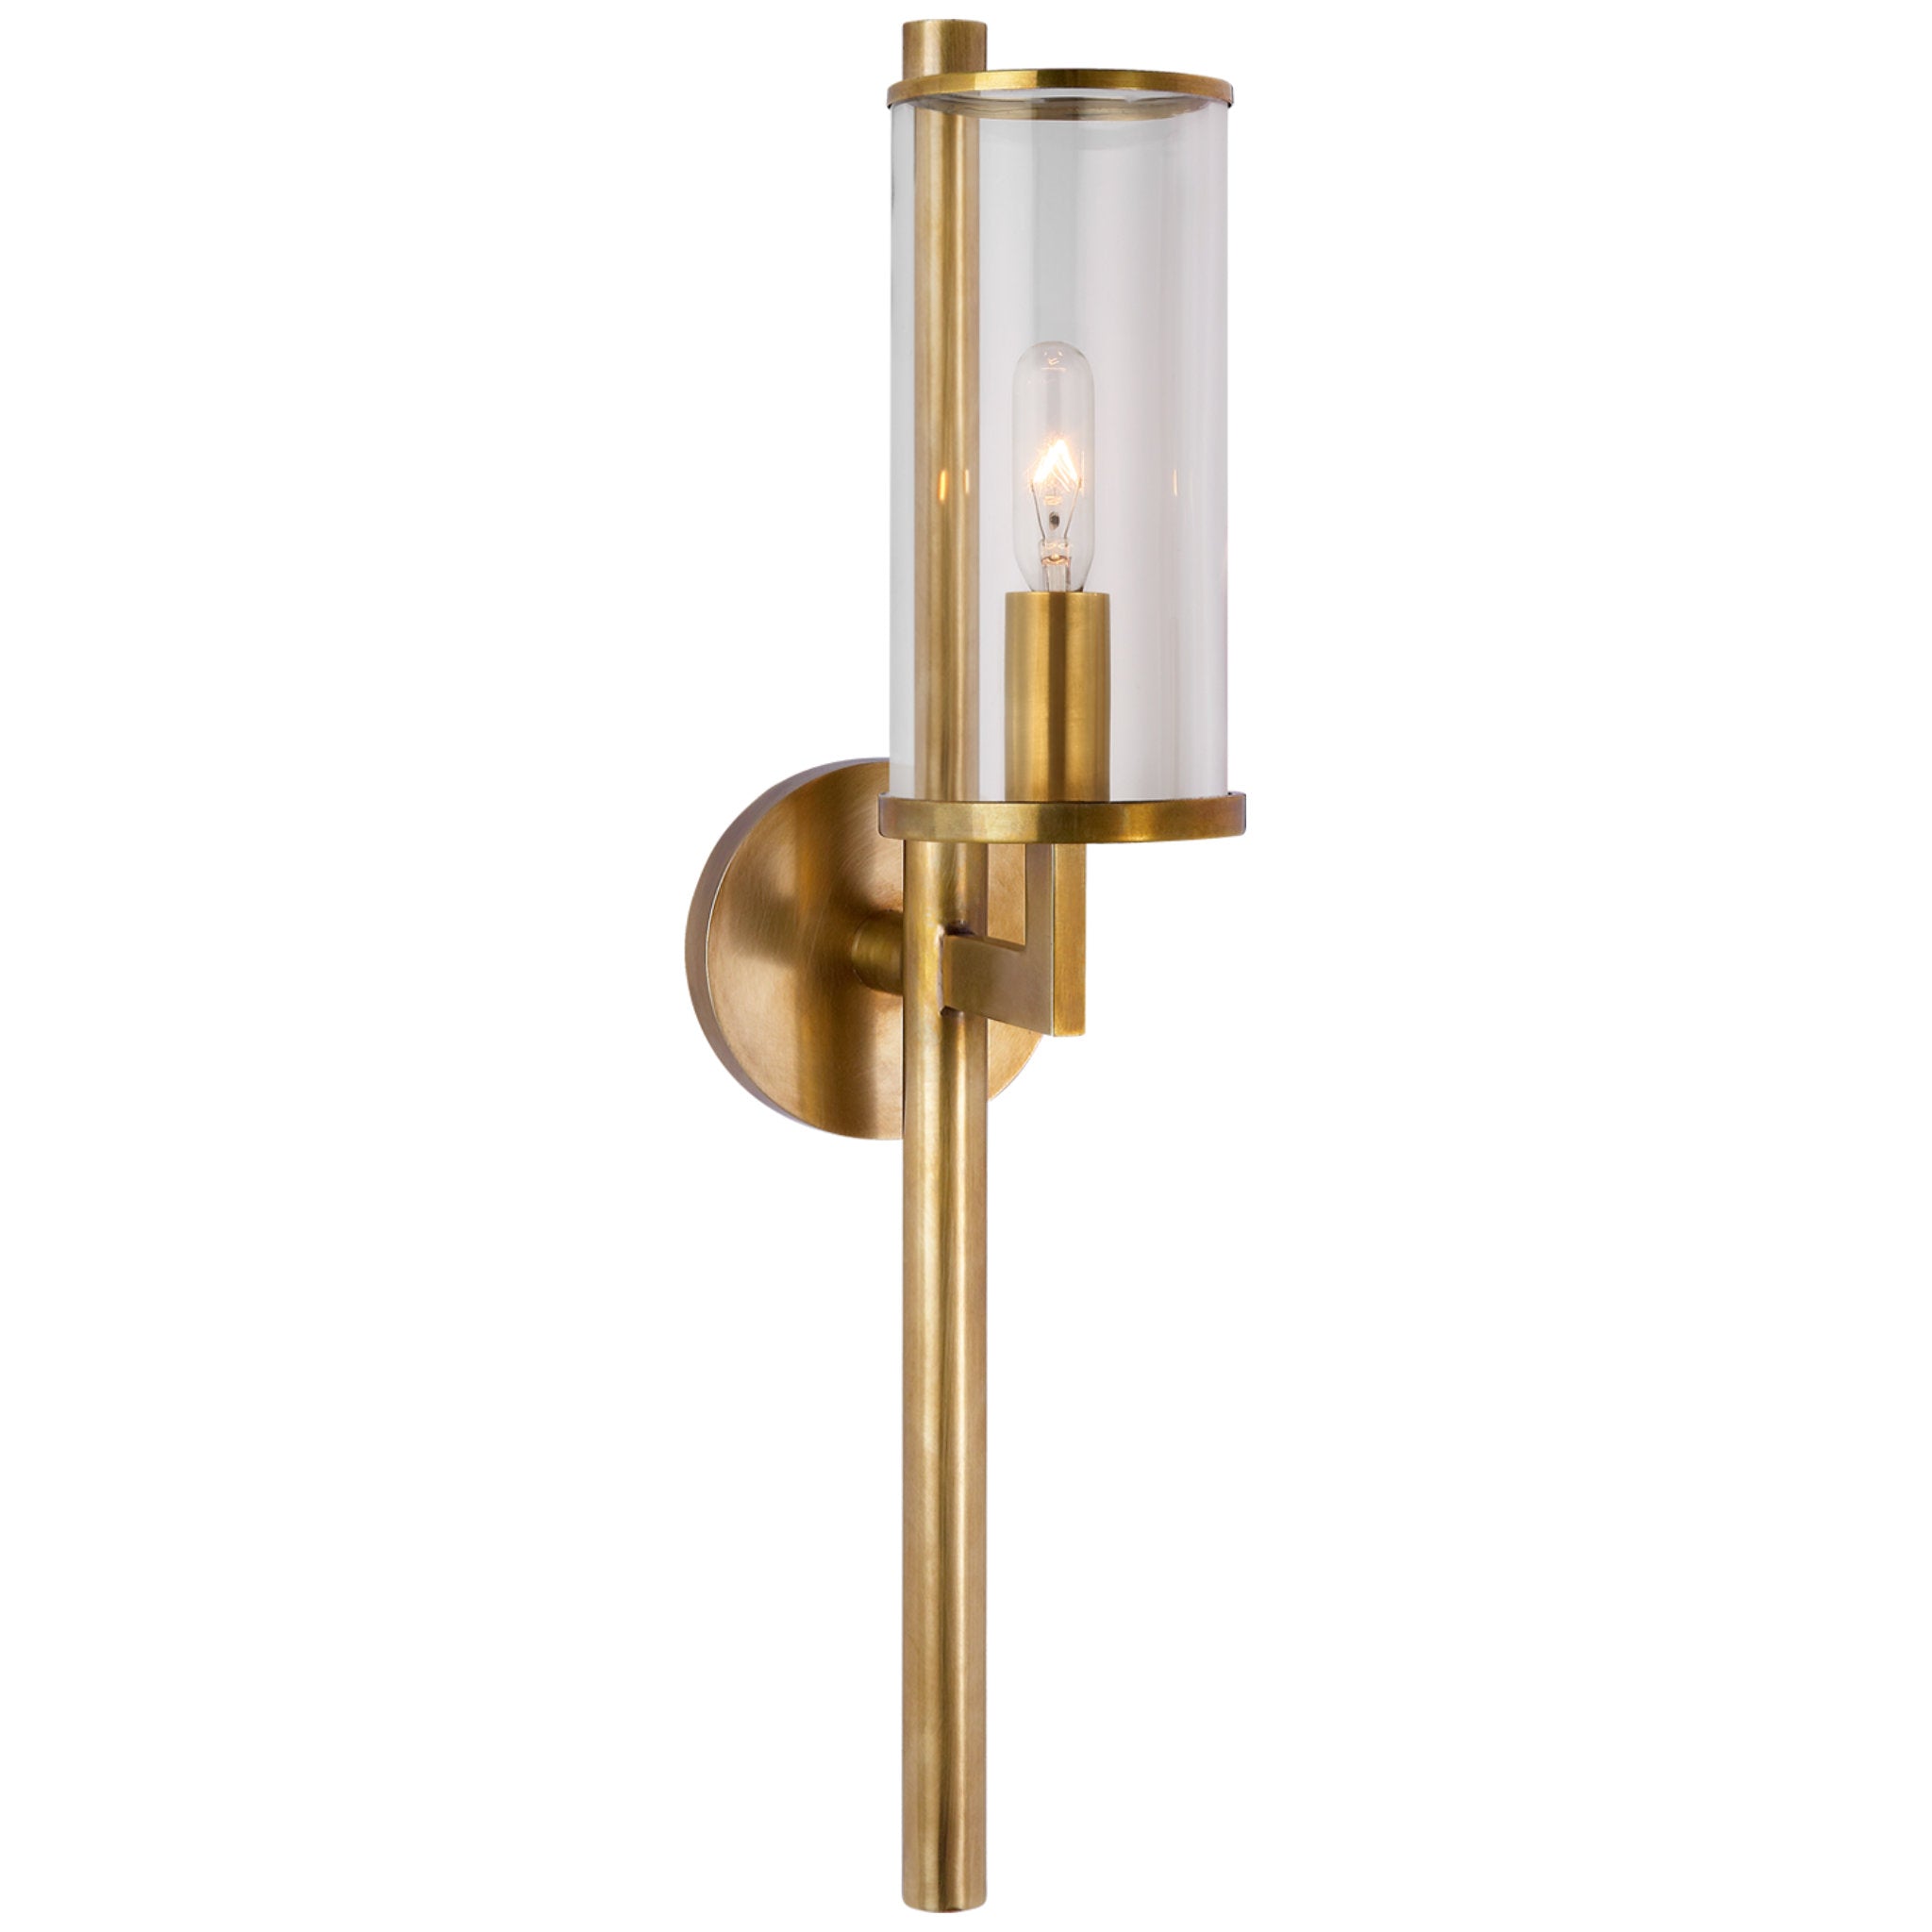 Kelly Wearstler Liaison Single Sconce in Antique-Burnished Brass with Clear Glass